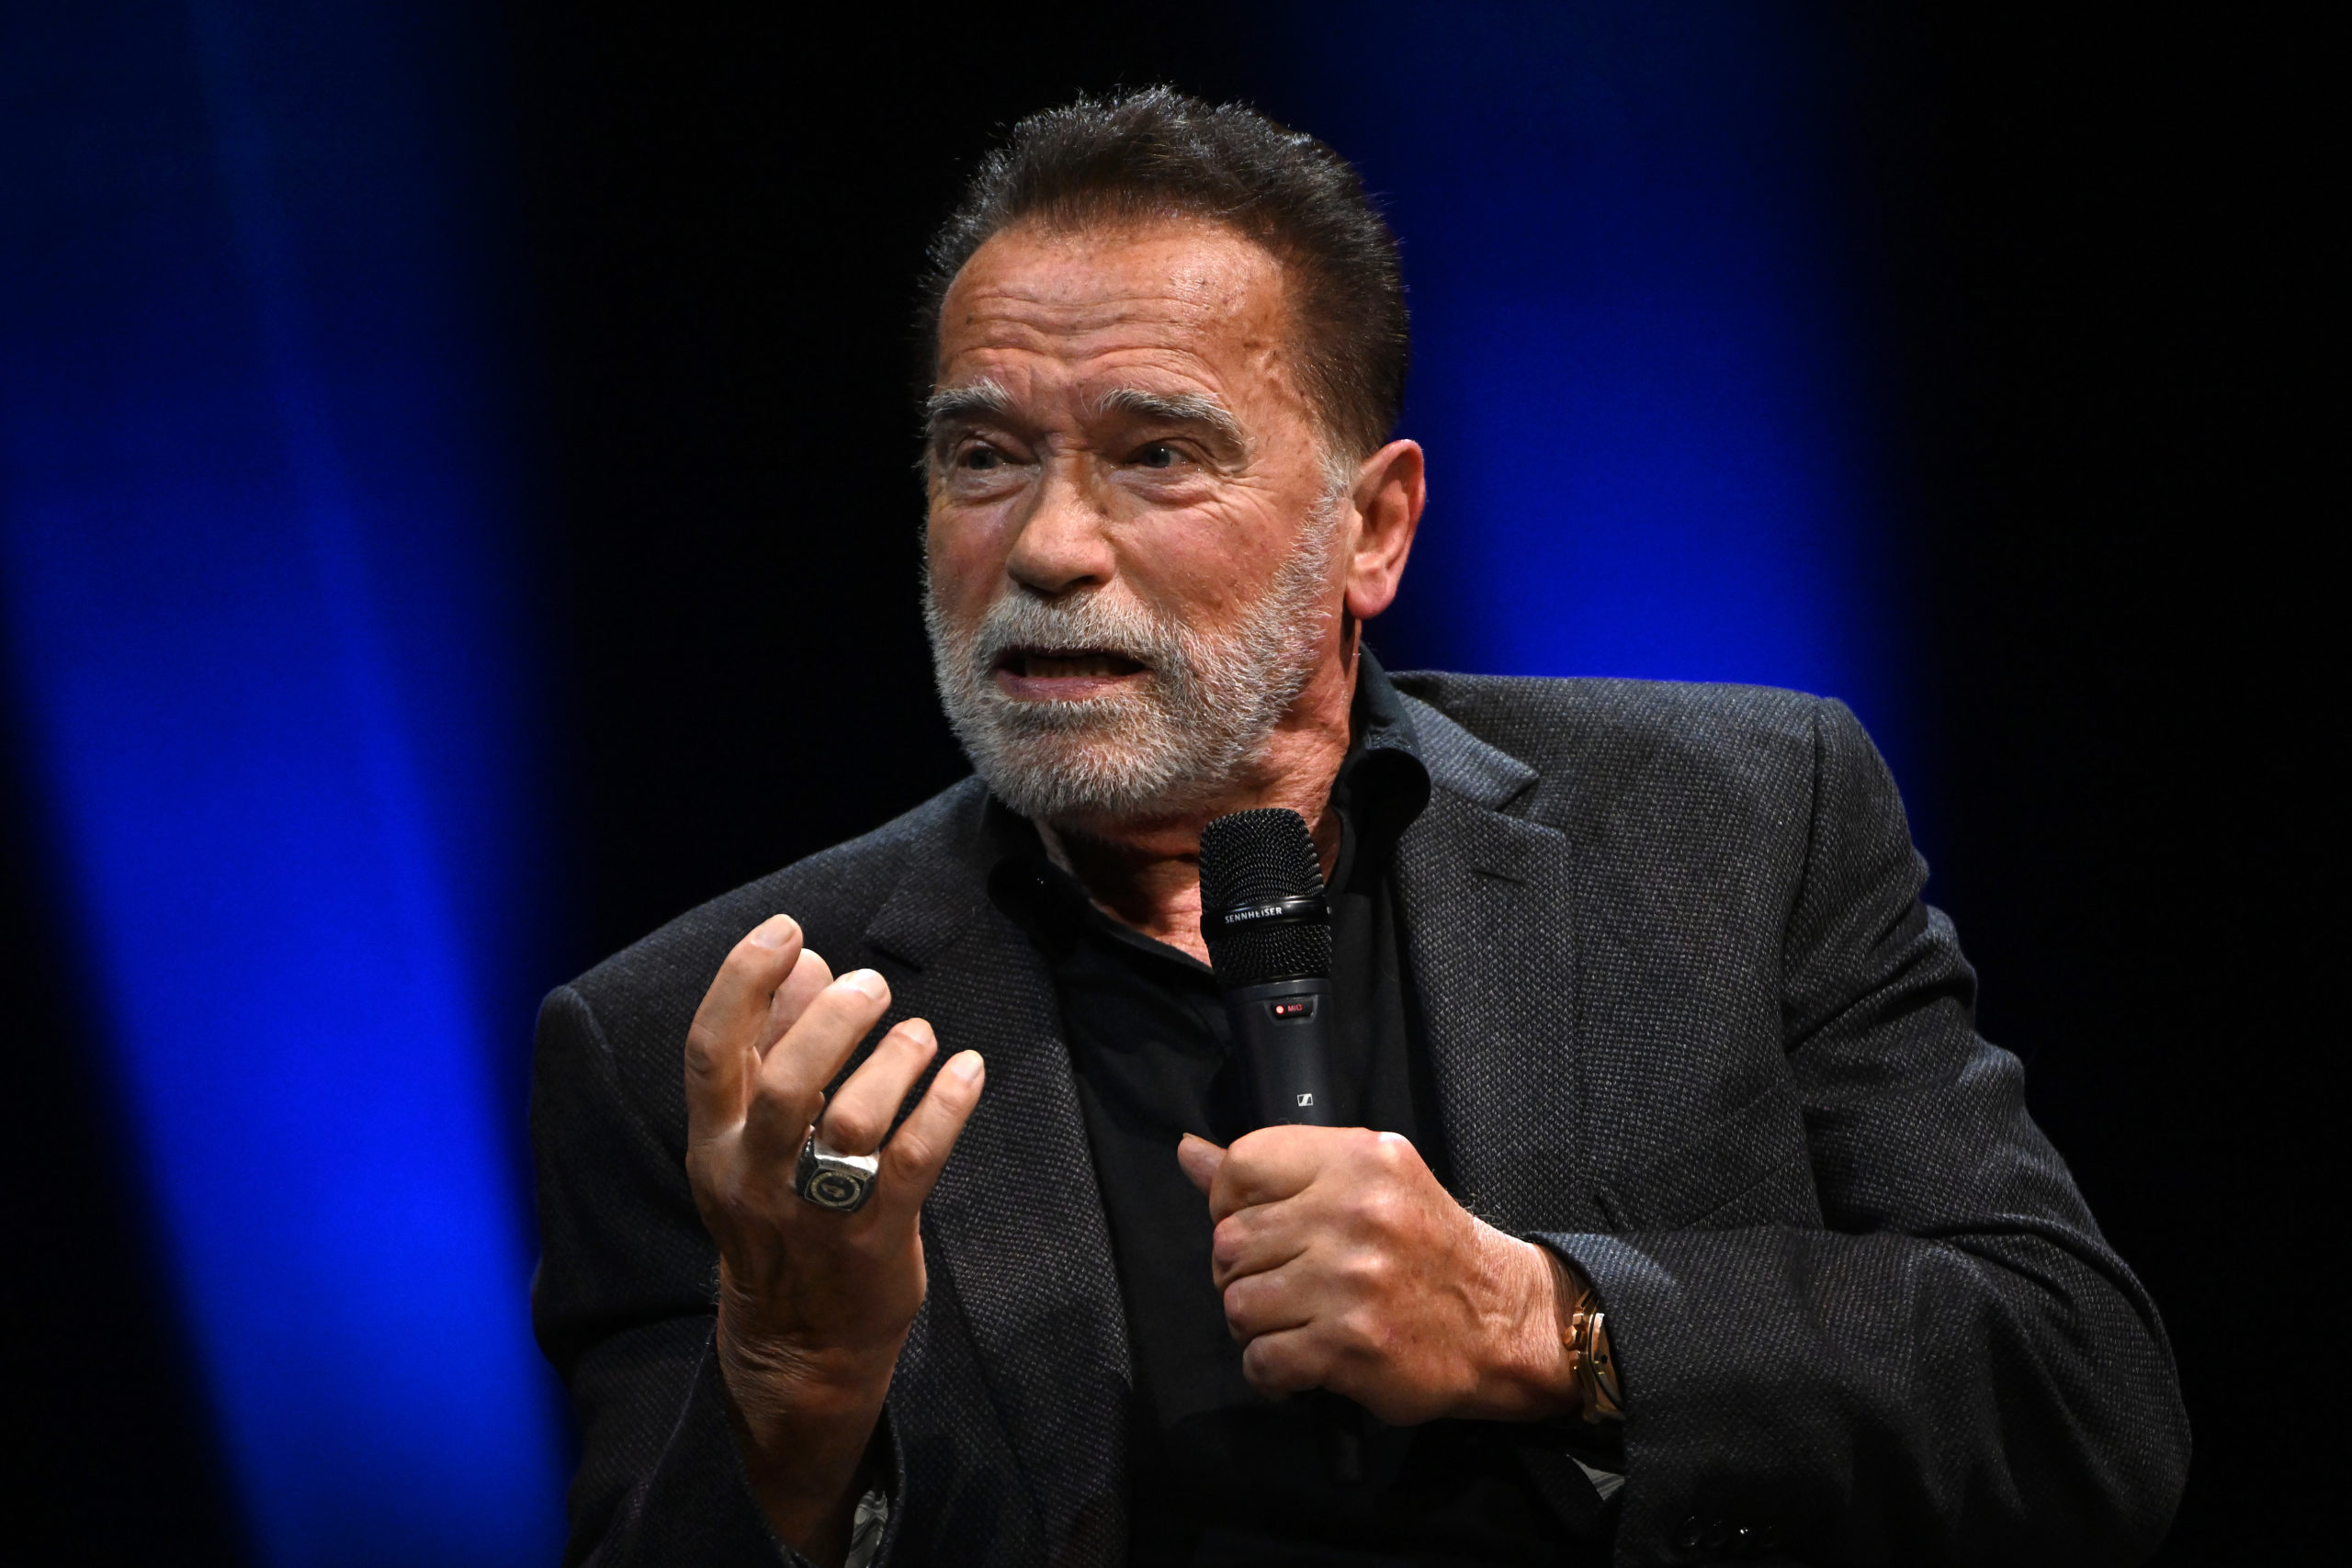 LONDON, ENGLAND - OCTOBER 24: EXCLUSIVE COVERAGE Arnold Schwarzenegger speaks onstage at an Evening with Arnold Schwarzenegger presented by Fane at London Palladium on October 24, 2023 in London, England. (Photo by Jeff Spicer/Getty Images for Fane)